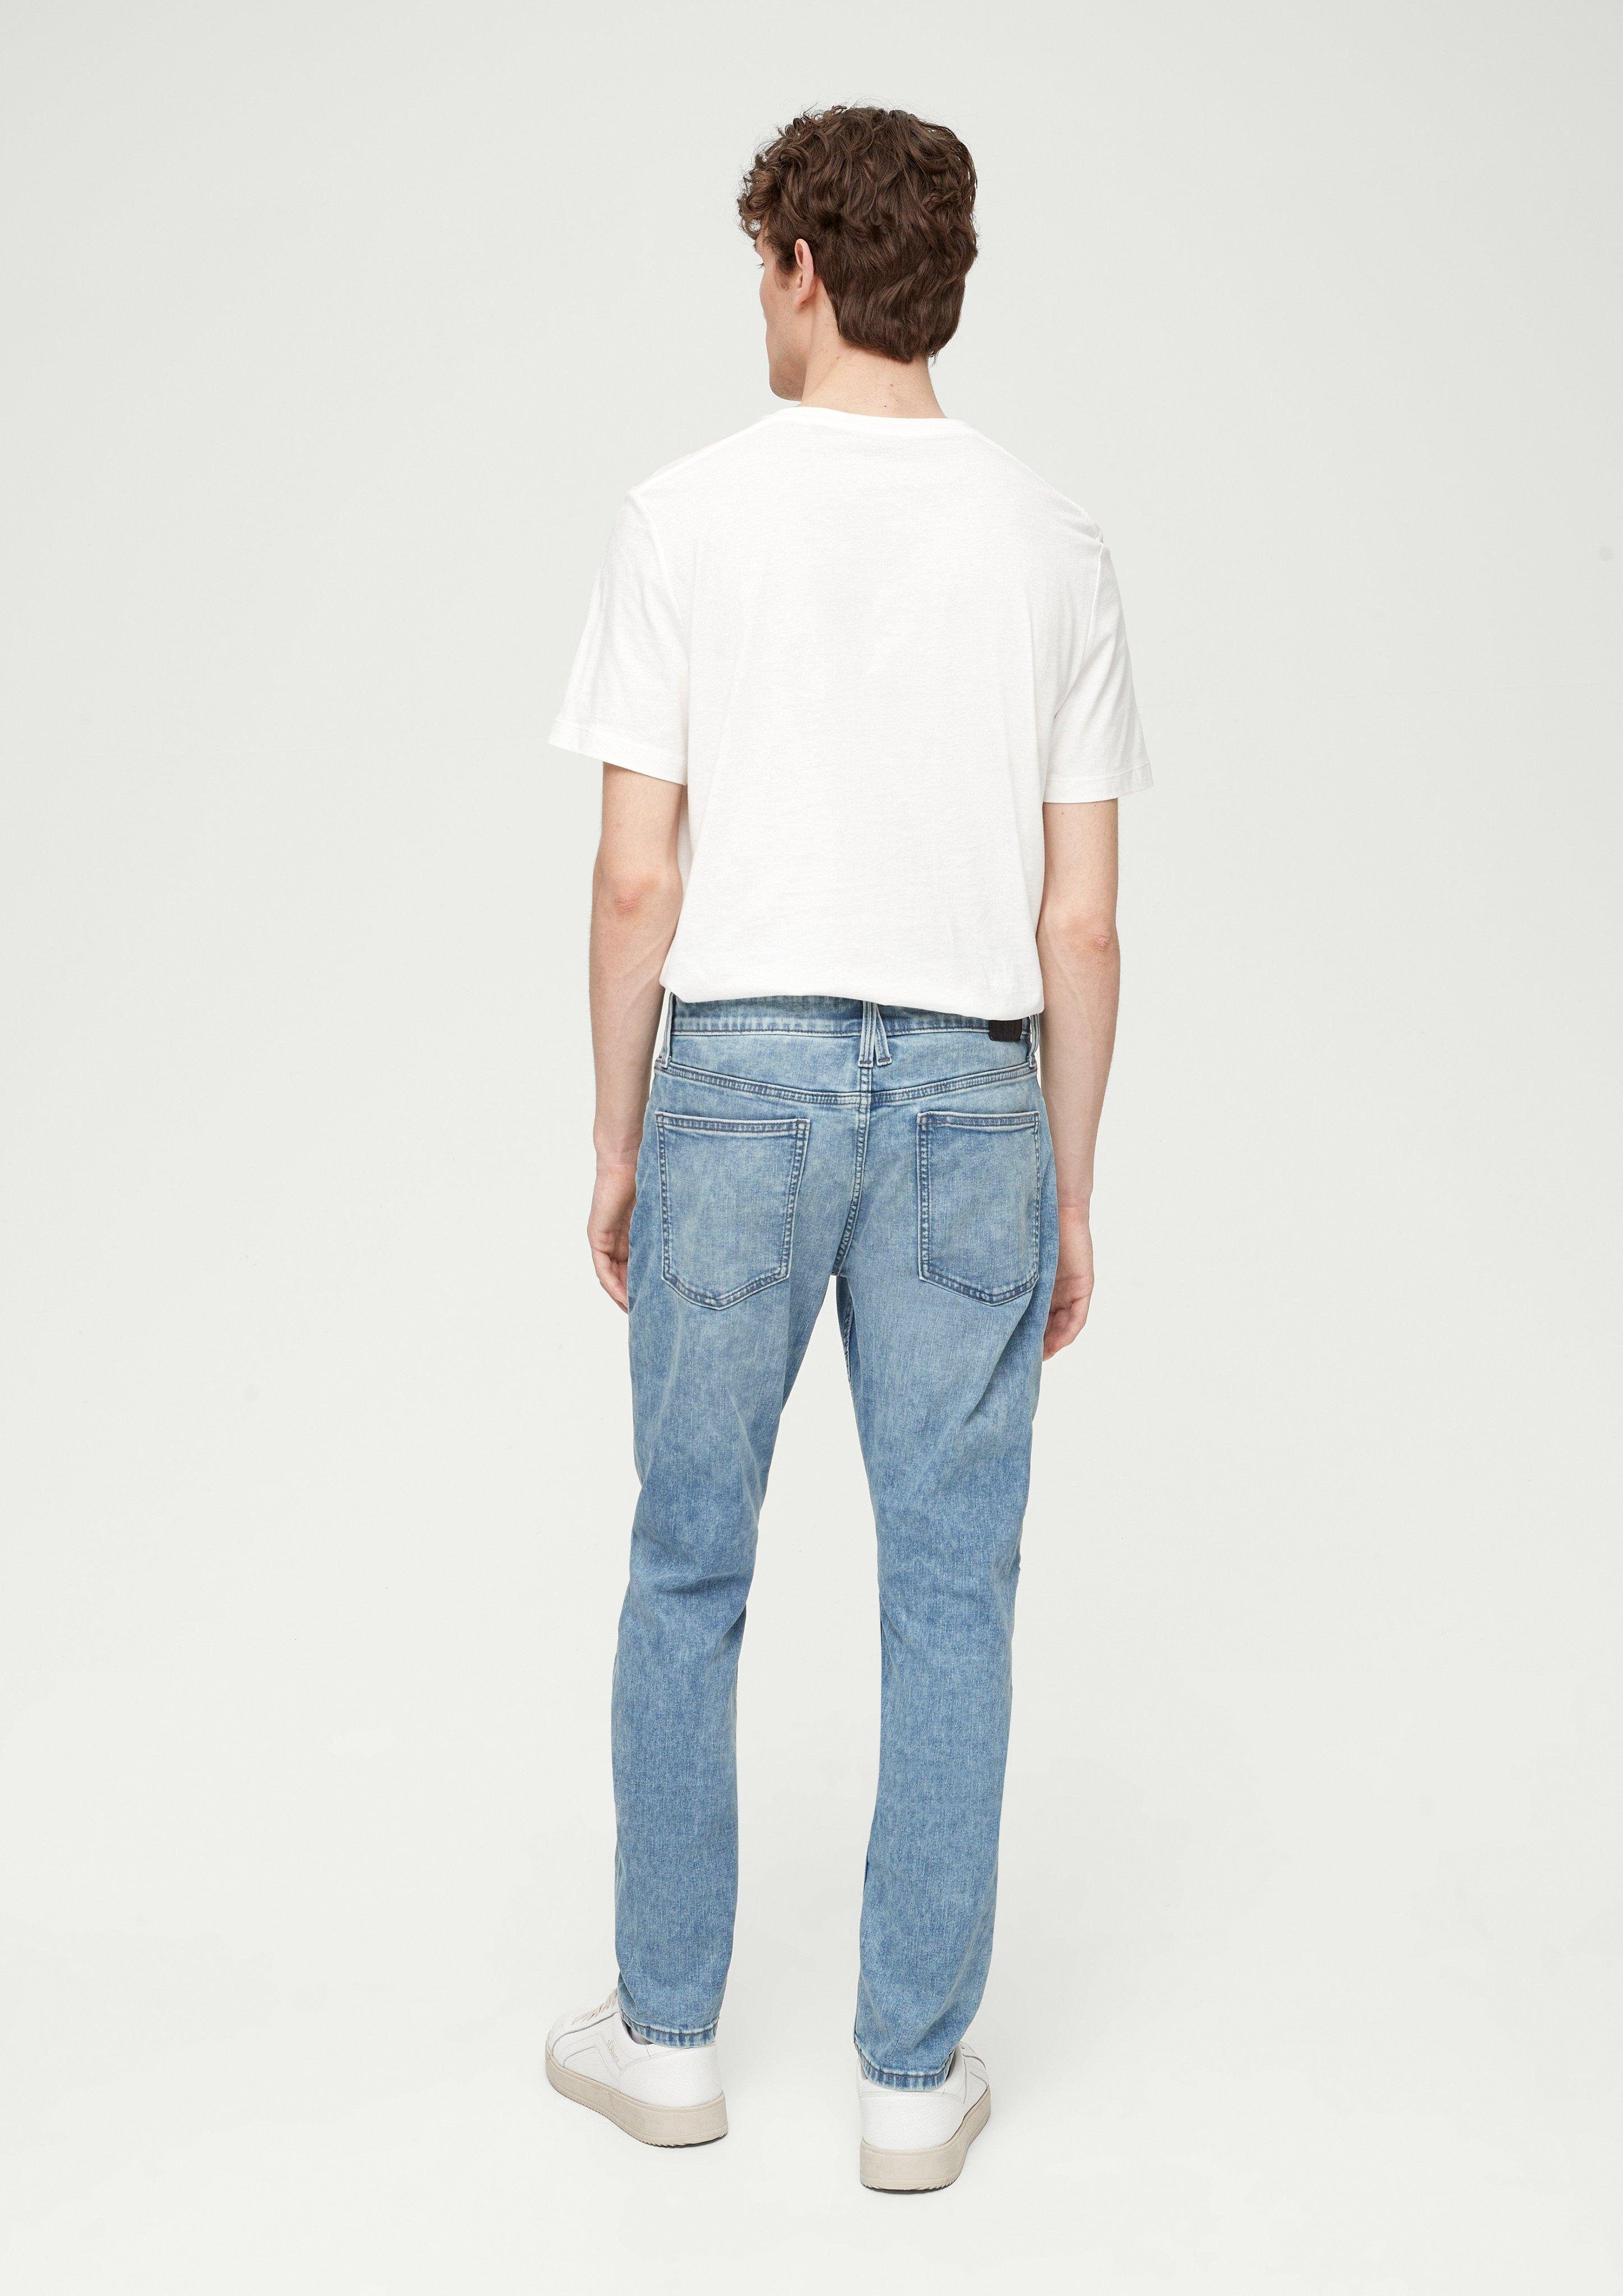 Jeans / Stoffhose Tapered / Leg High s.Oliver Rise Fit Slim / Waschung